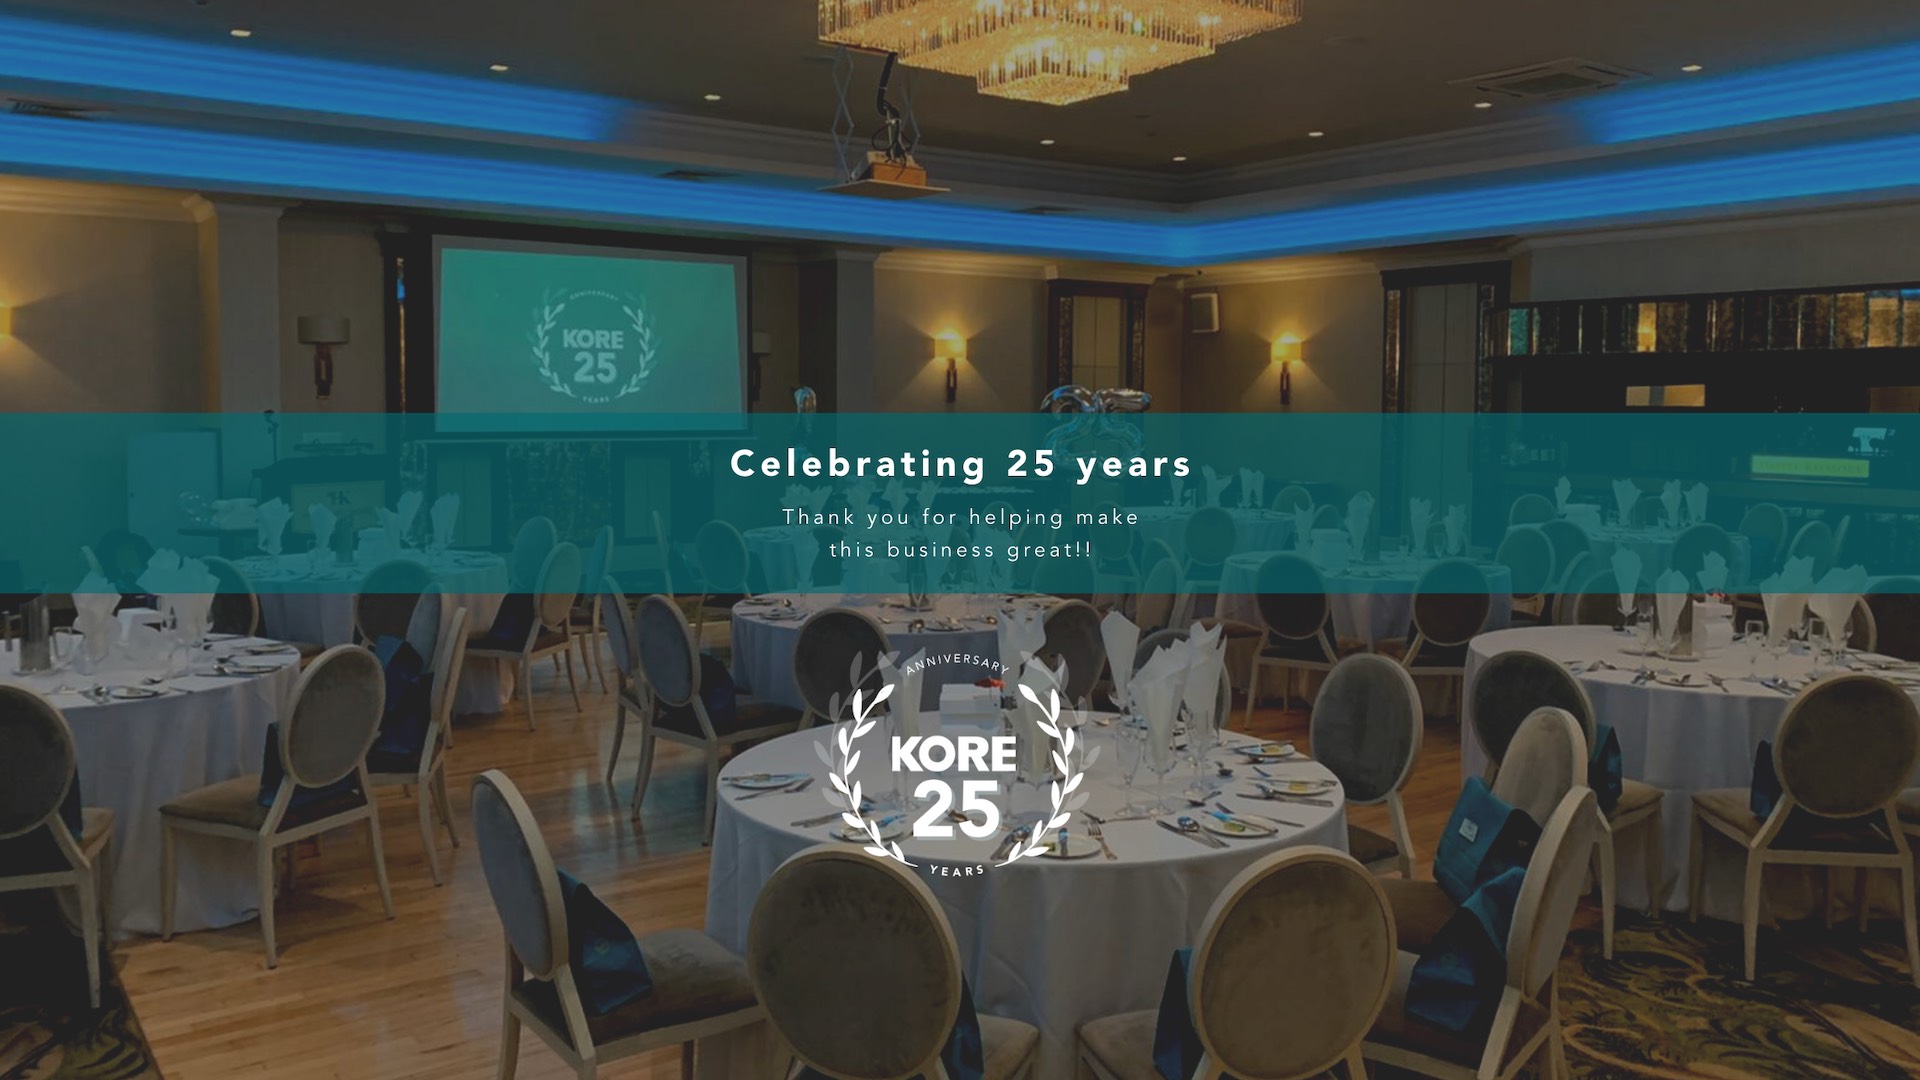 KORE Insulation celebrates 25 years in business at the Hotel Kilmore in Cavan